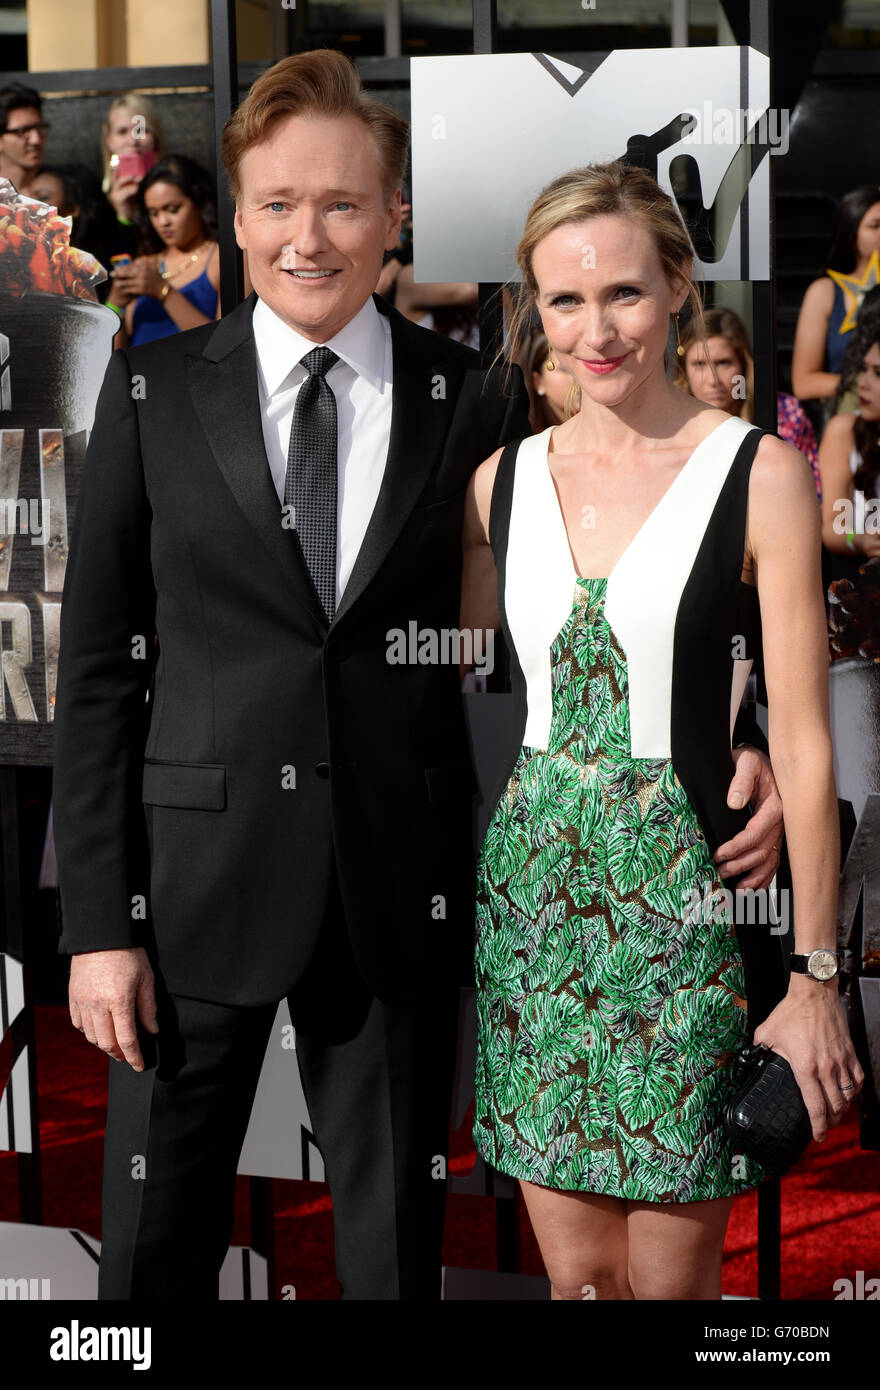 Liza Powel and Conan O'Brien arriving at The MTV Movie Awards 2014, at the Nokia Theatre L.A. Live, Los Angeles. Stock Photo